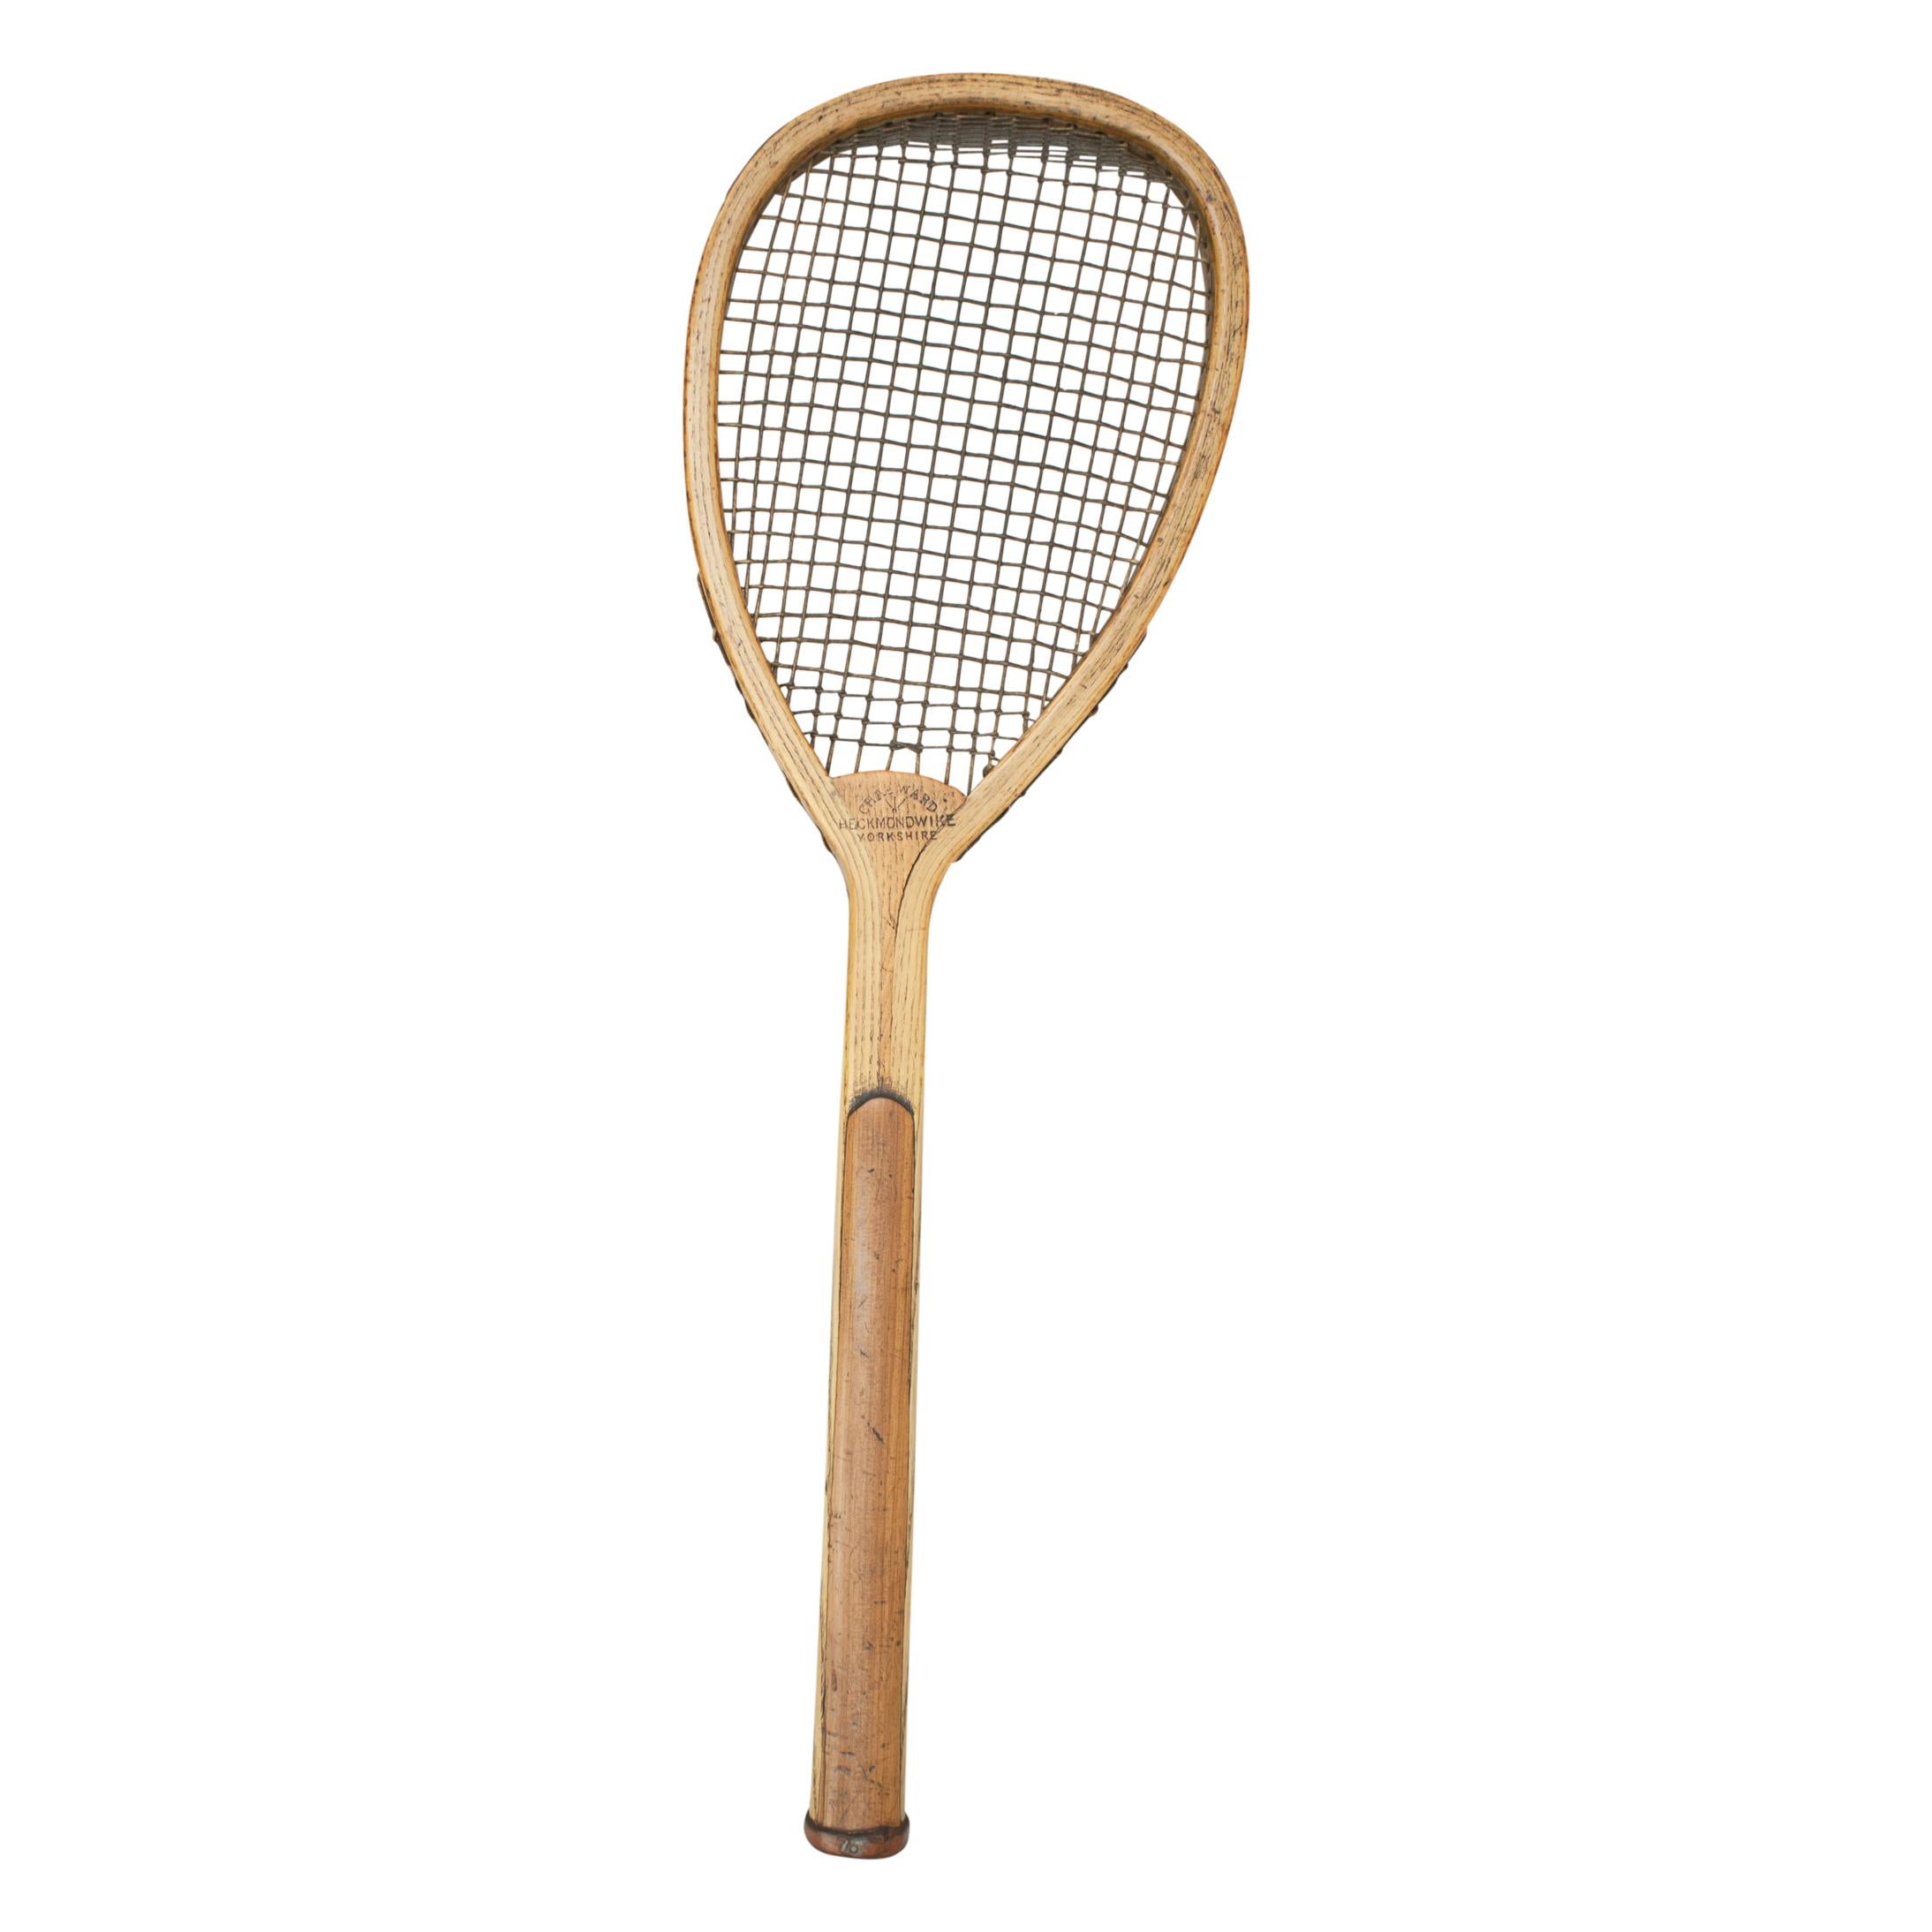 Antique Lopsided Charles Ward lawn tennis racket.
A rare, early lopsided (tilt head) lawn tennis racquet in good original condition by Chas. Ward, Heckmondwike, Yorkshire. The ash frame is in very good condition. The convex wedge stamped with the